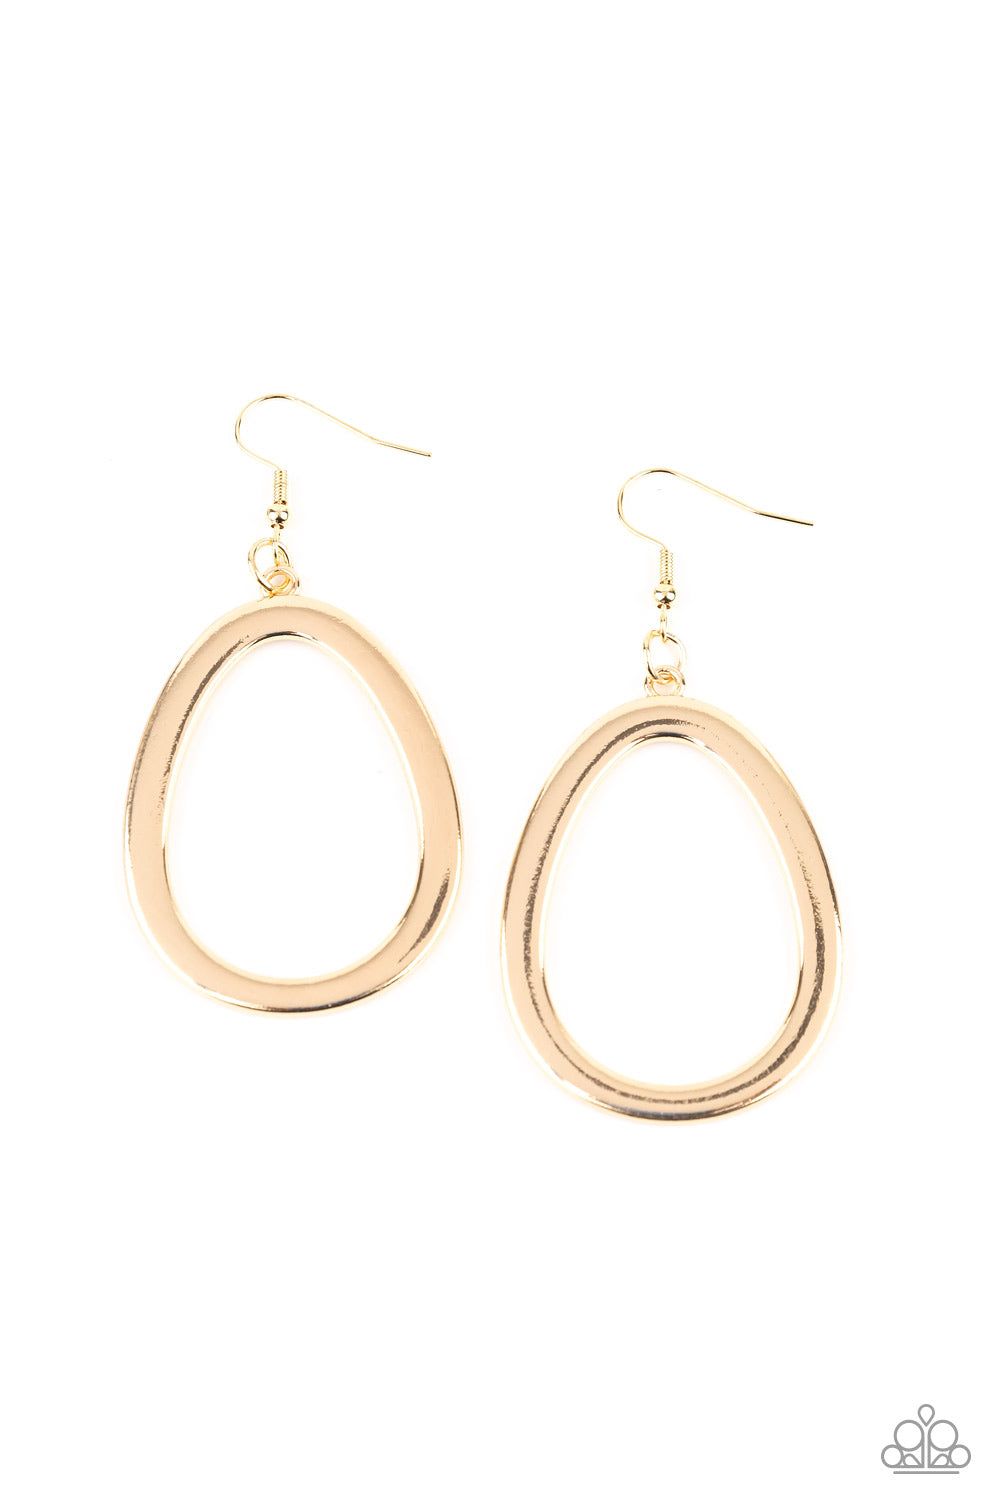 Casual Curves Earrings__Gold